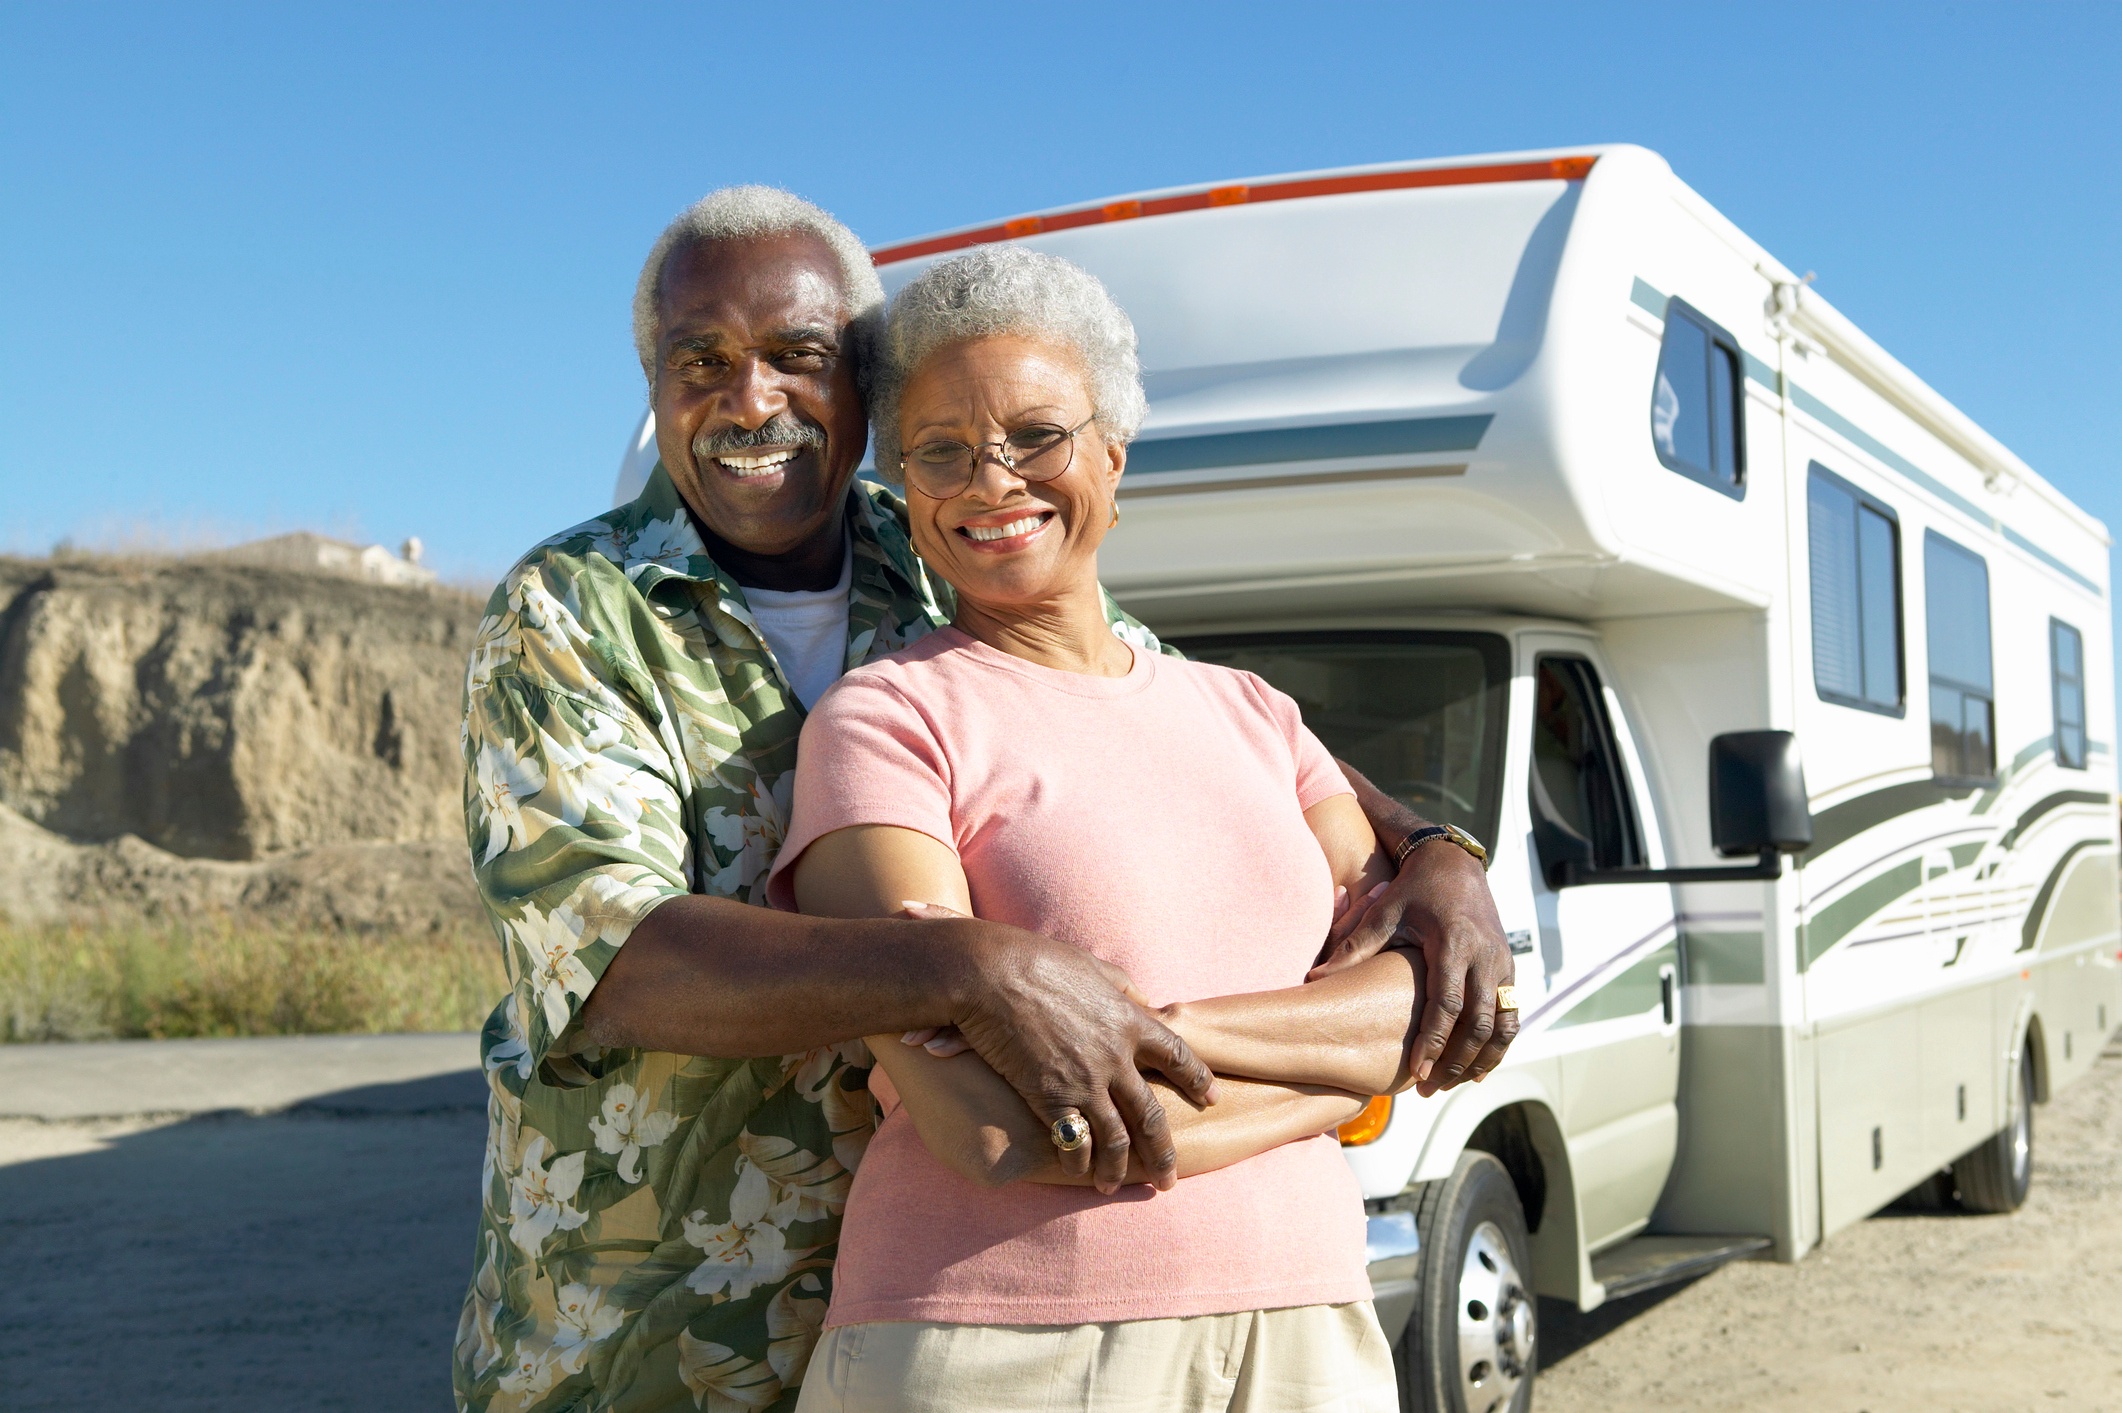 Storage for Frequent RV Travelers 